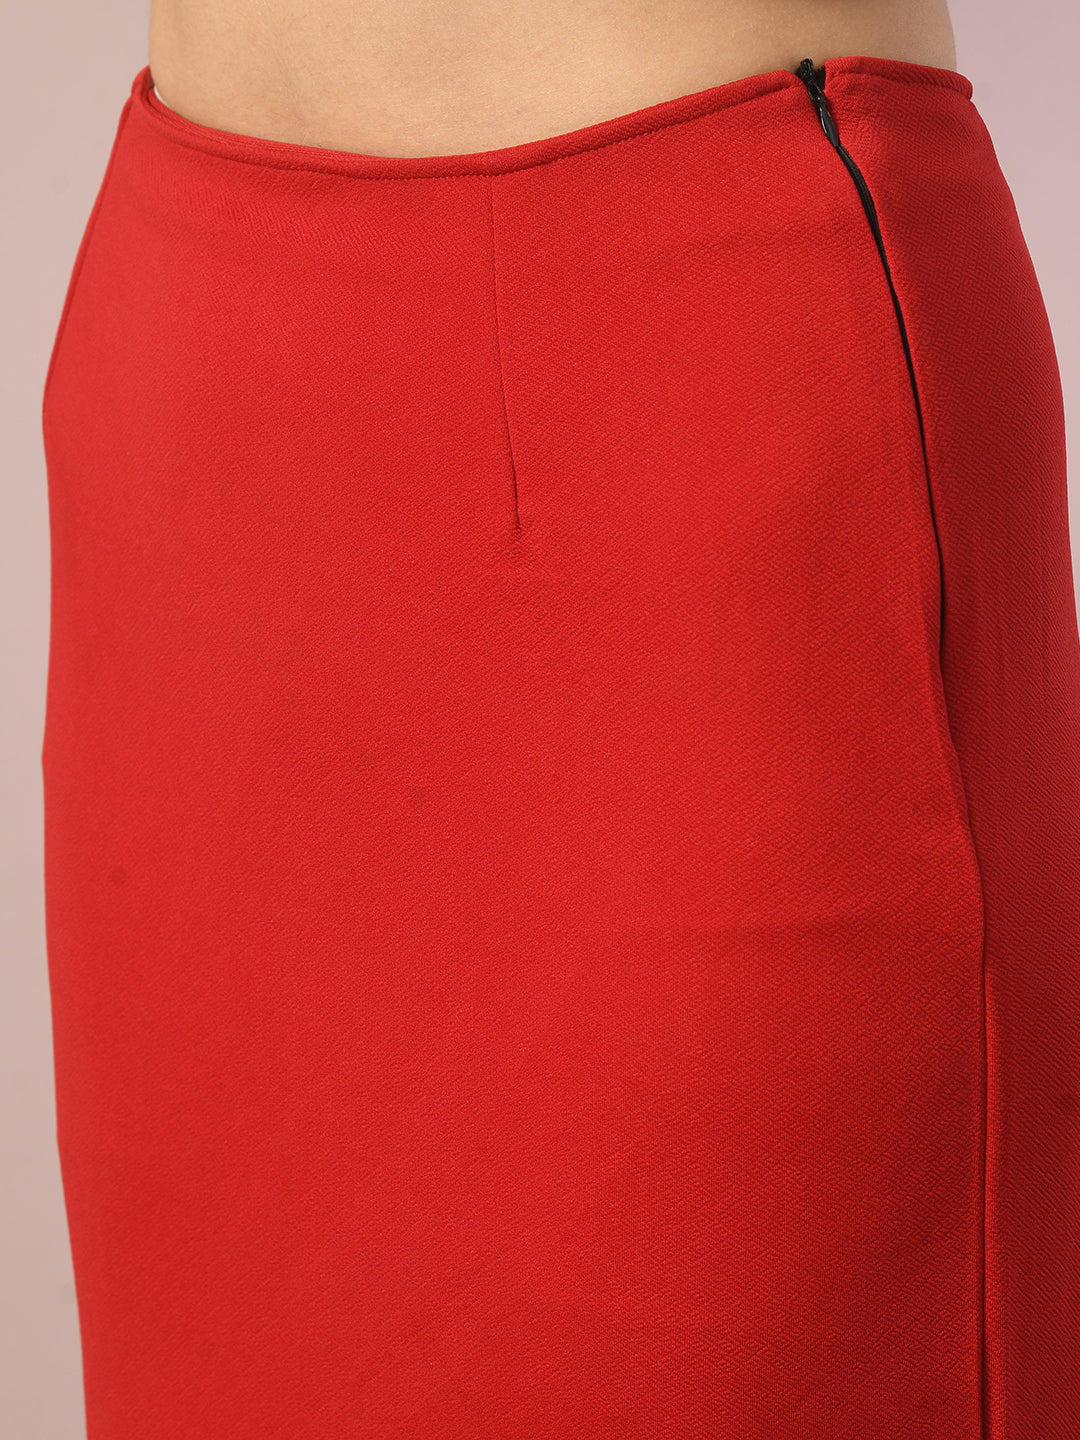 Women's  Red Solid Knee Length Party Embellished Skirts   - Myshka